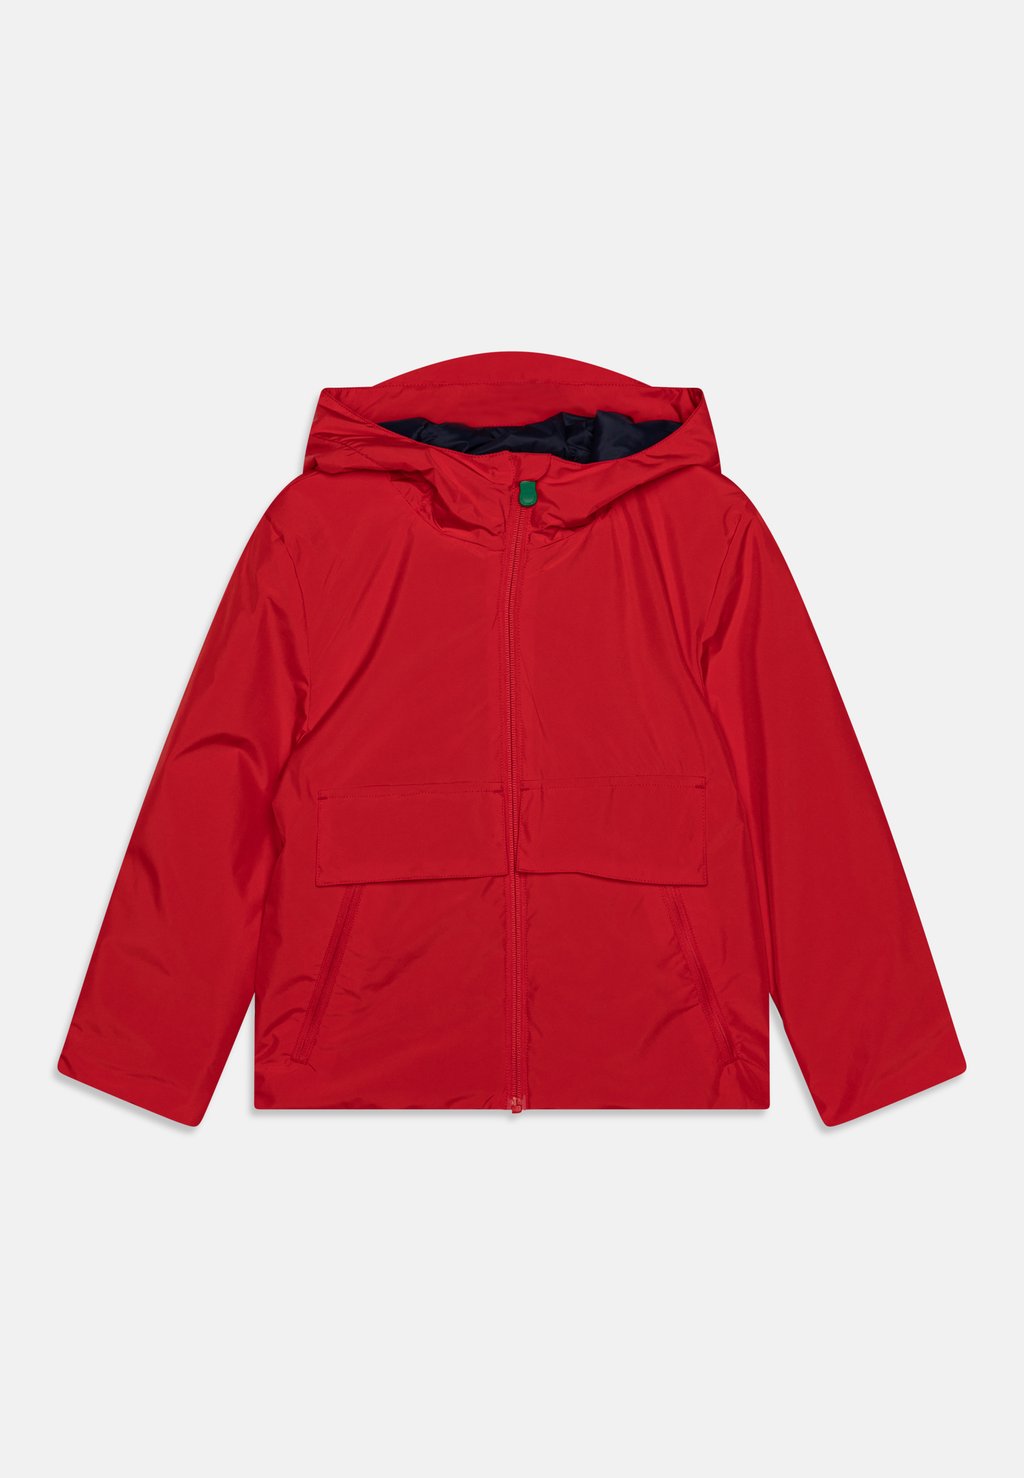 Дождевик RIN UNISEX Save the duck, цвет flame red лампочка uniel il n c35 3 red flame e14 cl red flame